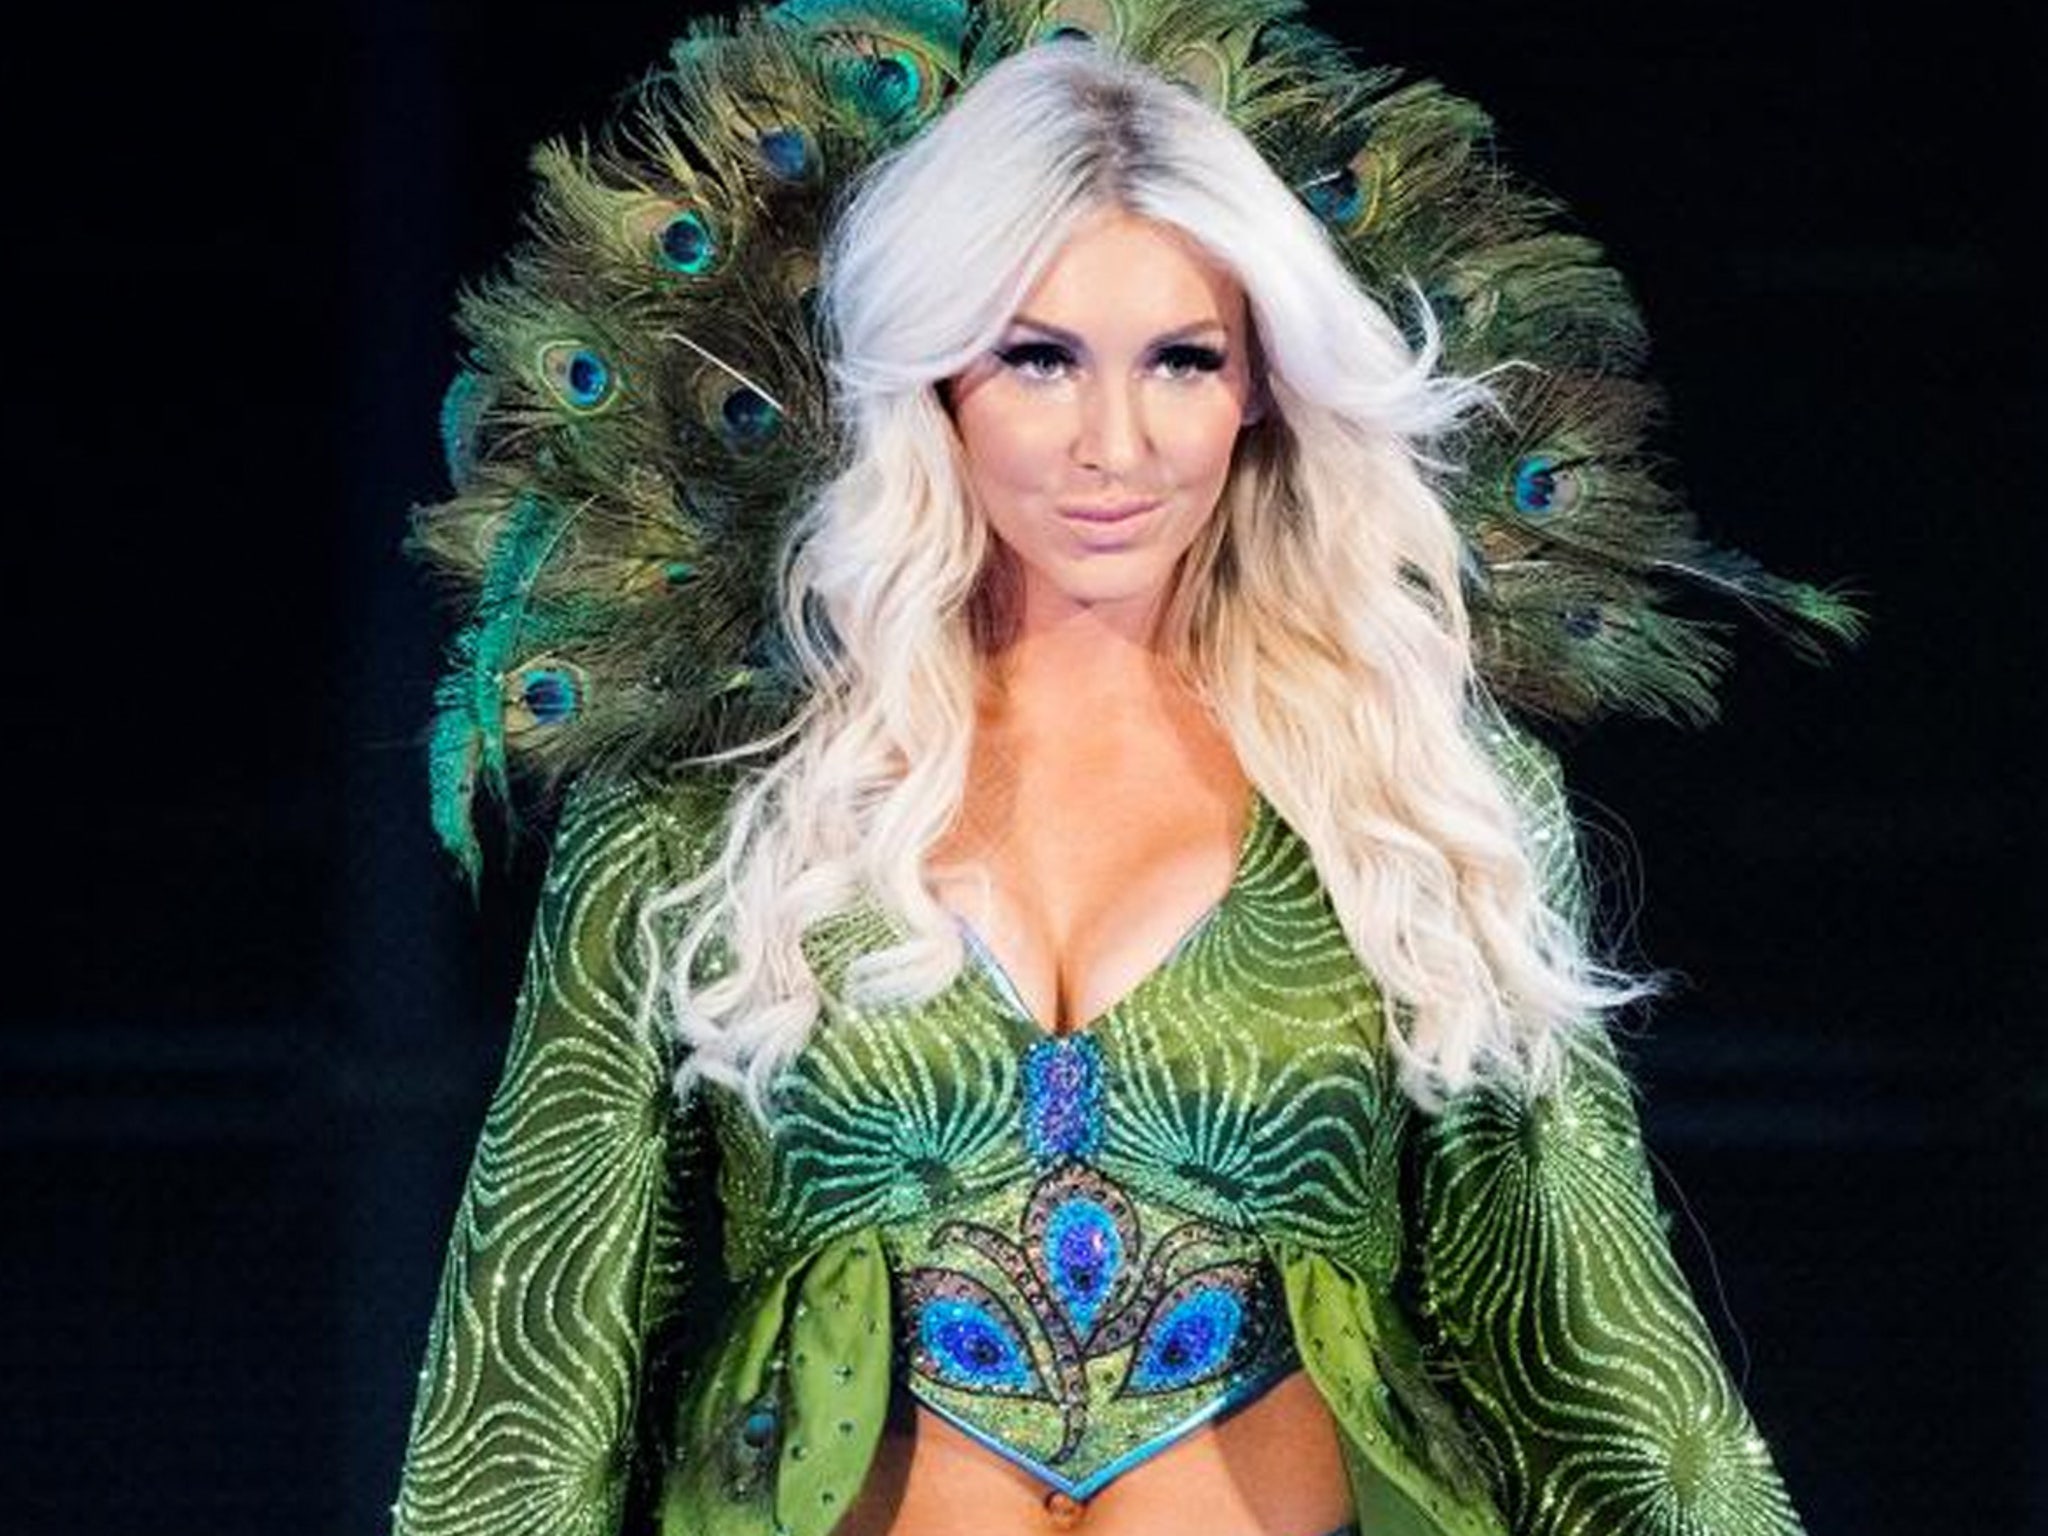 chad oyer recommends wwe charlotte leaked images pic